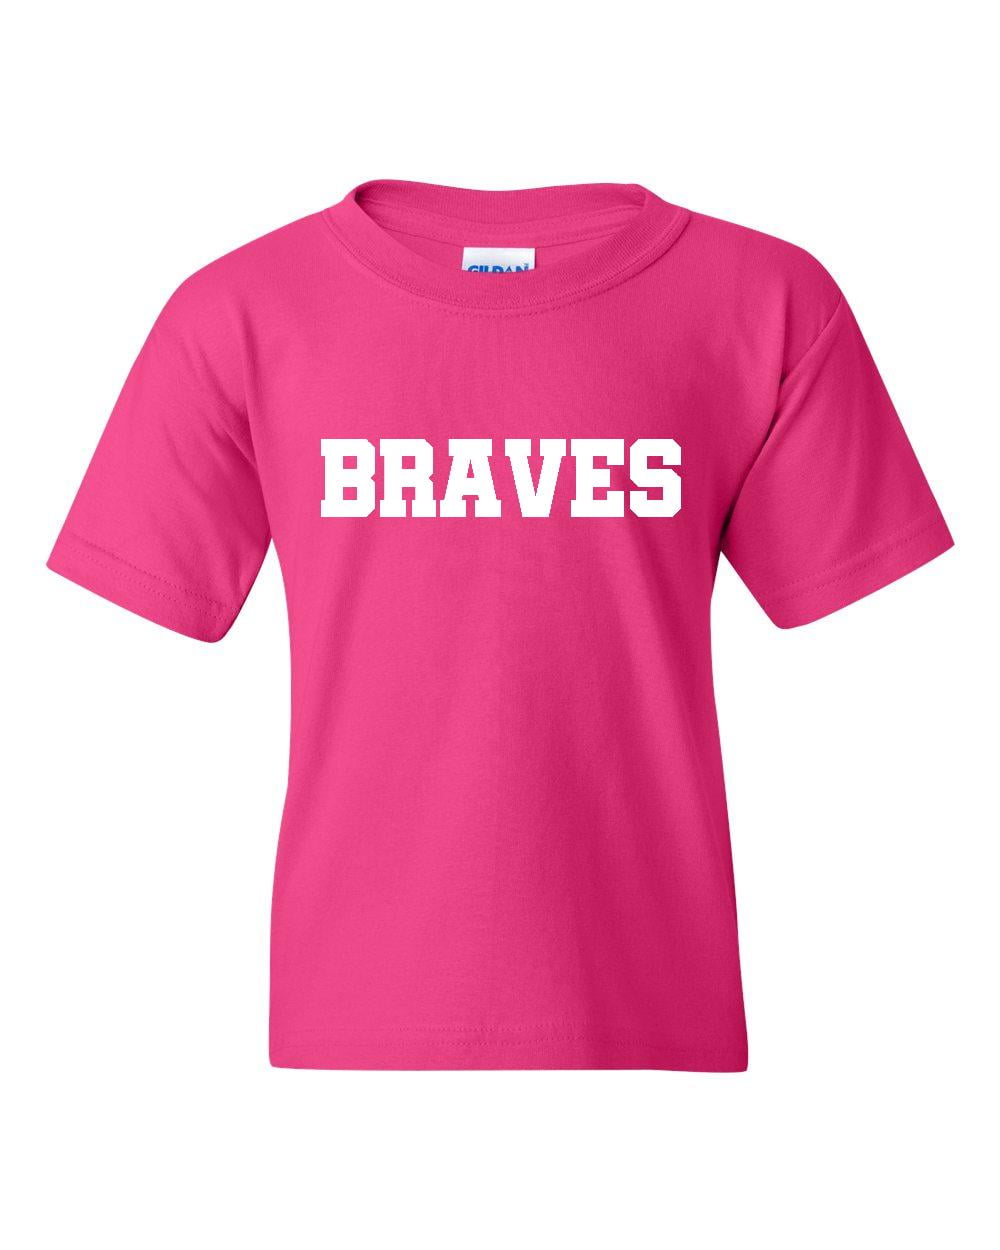 IWPF - Big Girls T-Shirts and Tank Tops, up to Big Girls Size 24 - Braves 